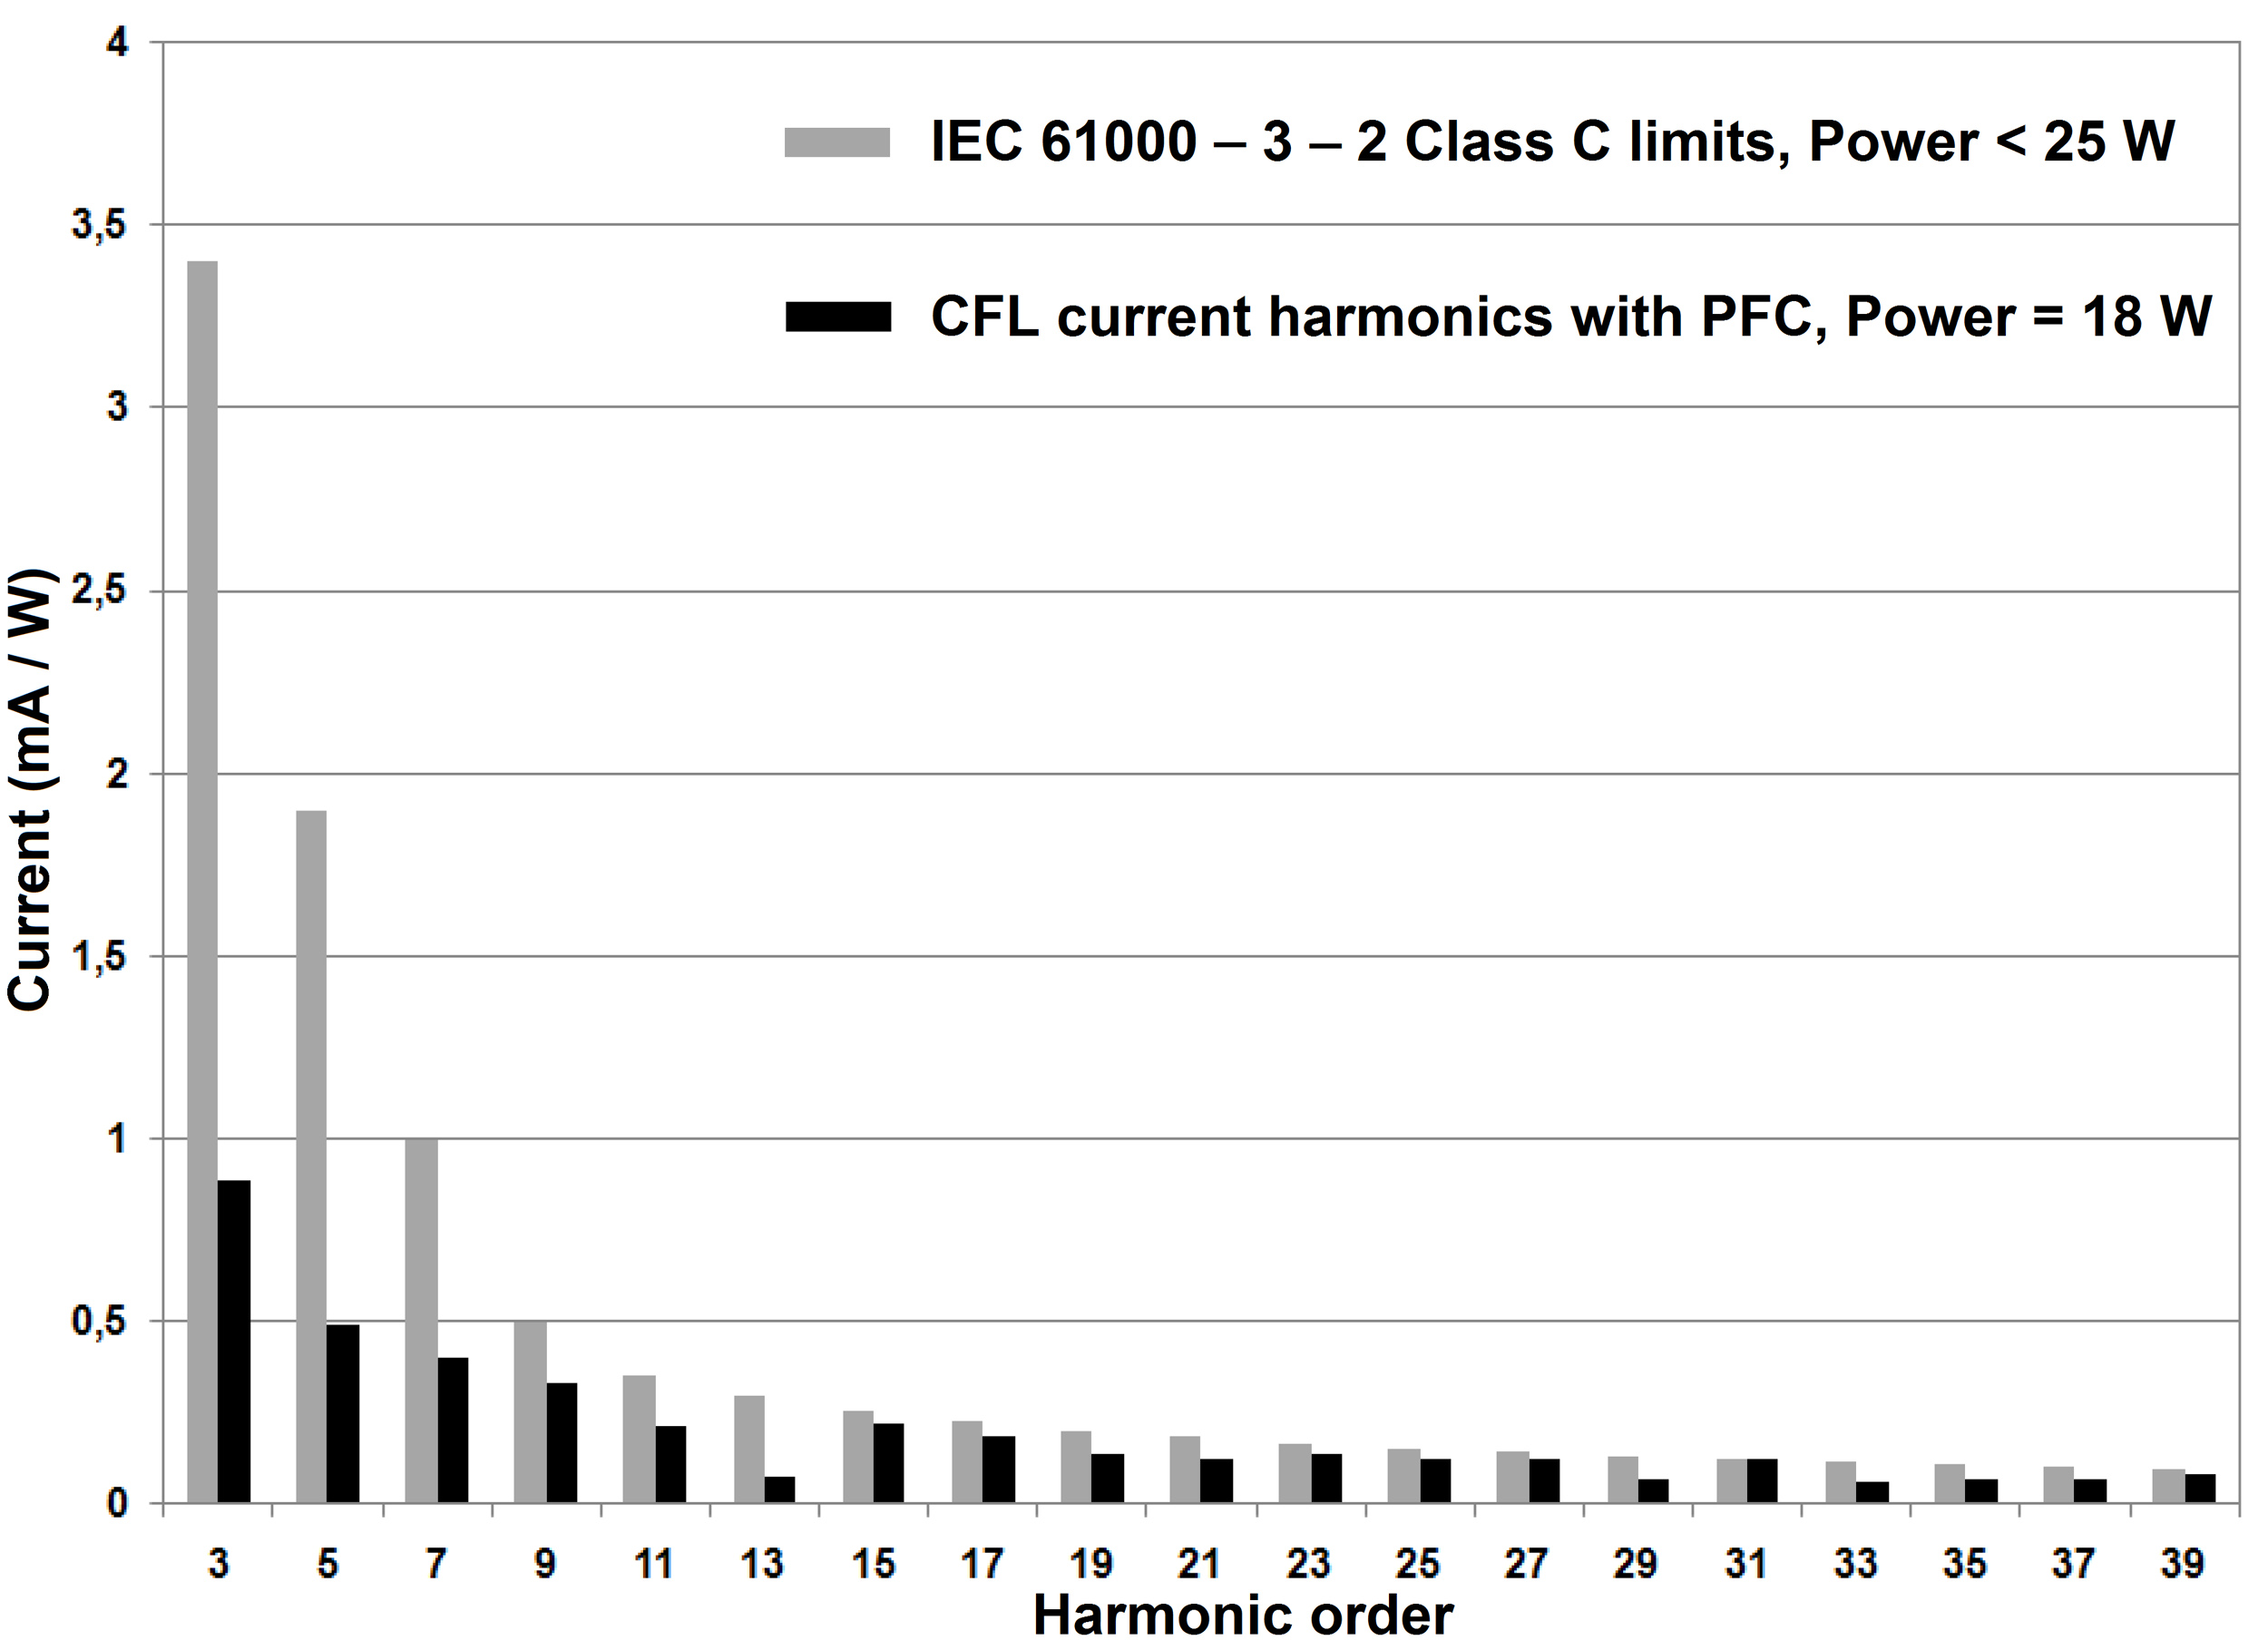 Current harmonics of controlled CFL in comparison with the limits set by IEC 61000-3-2 Class C standard.